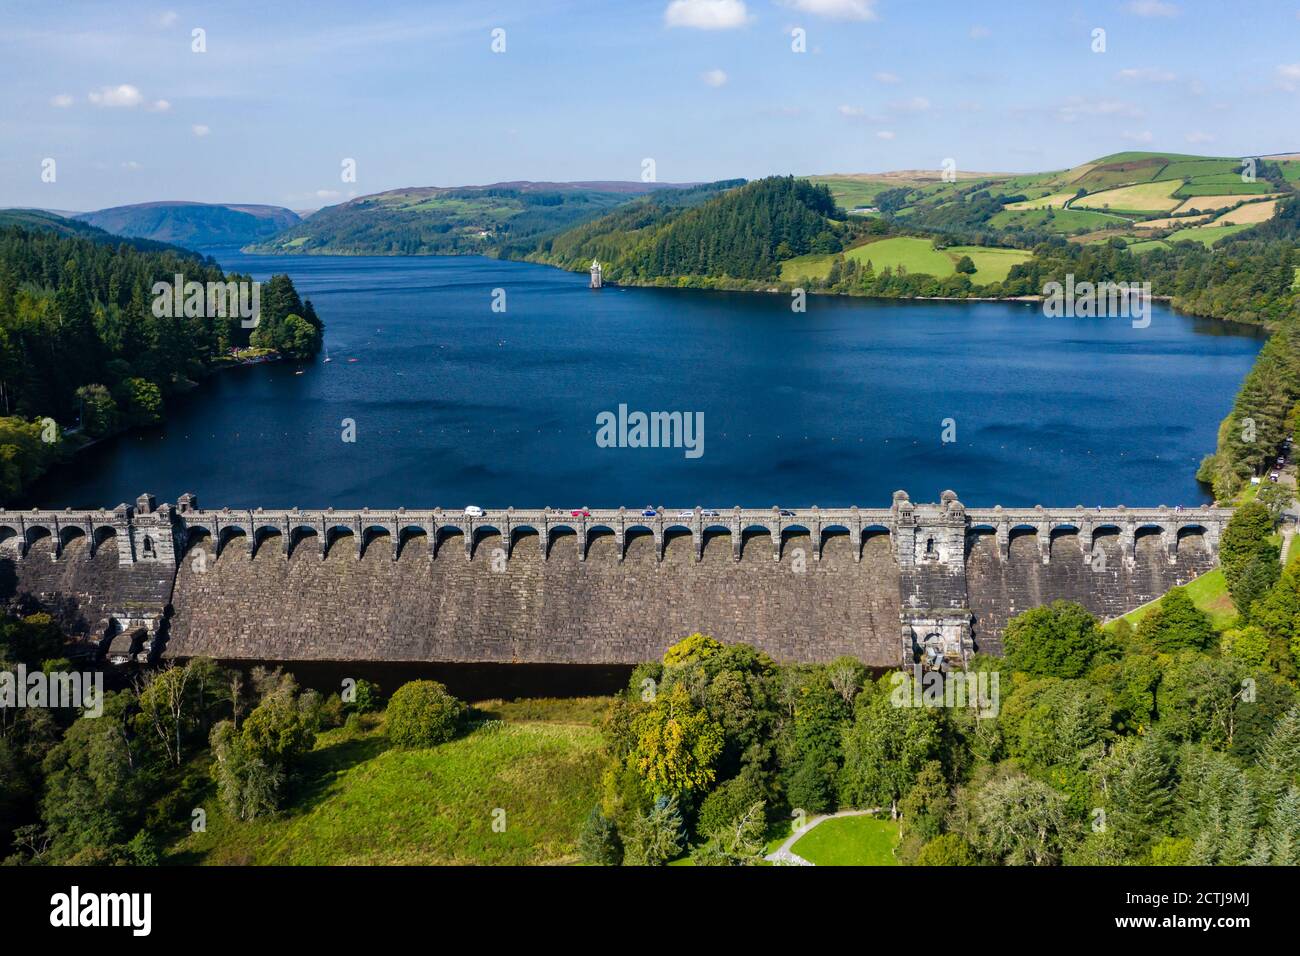 Aerial view of a dam wall and huge reservoir in a rural setting (Lake Vyrnwy, Wales) Stock Photo